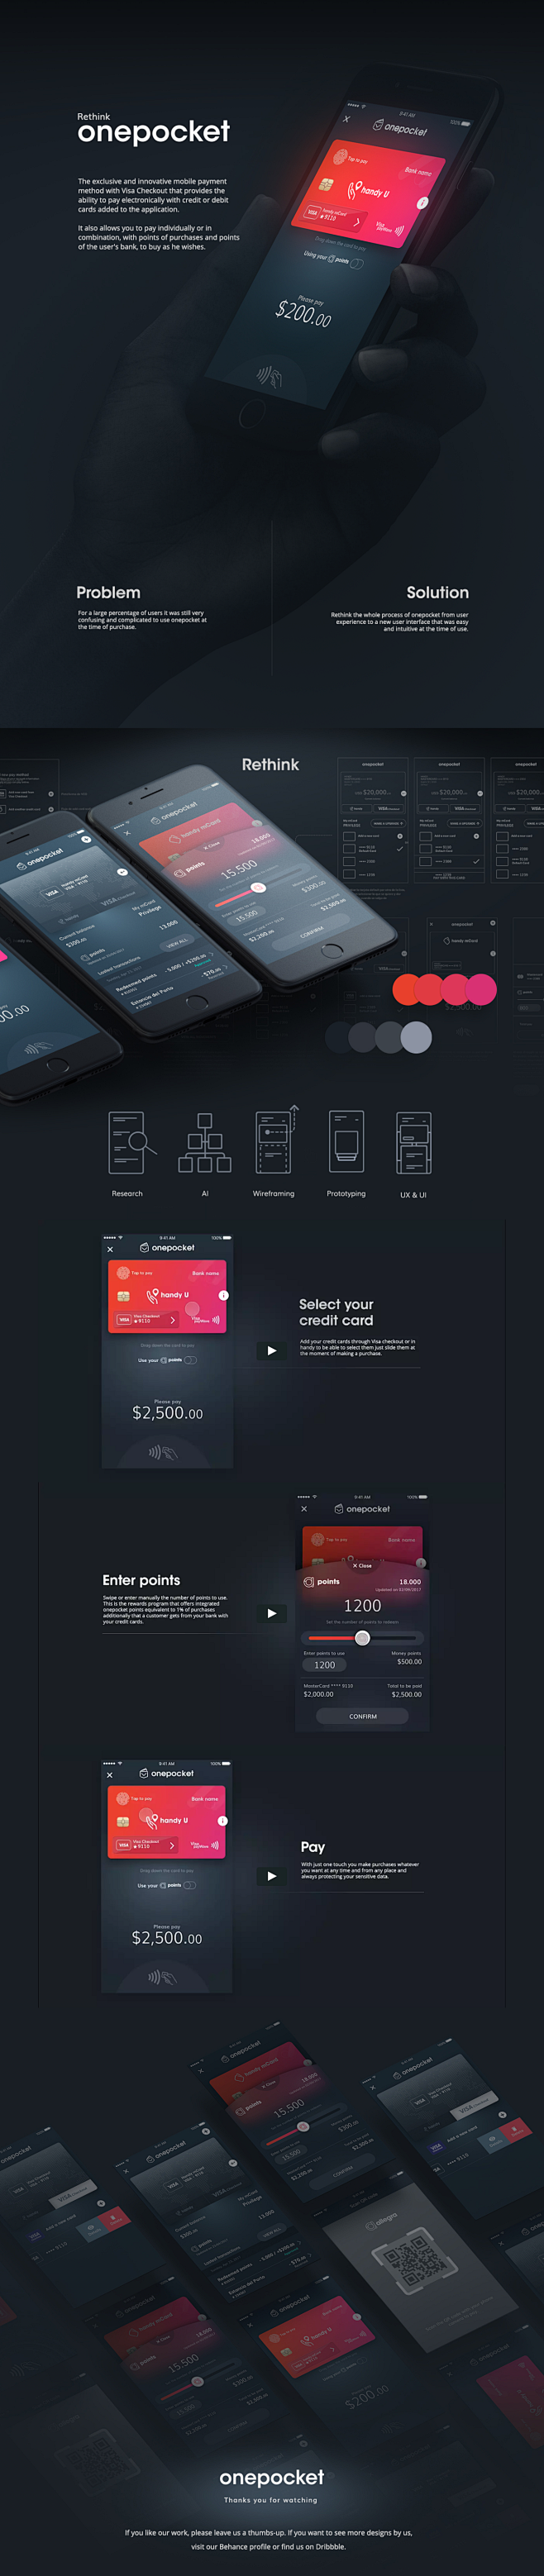 Onepocket on Behance